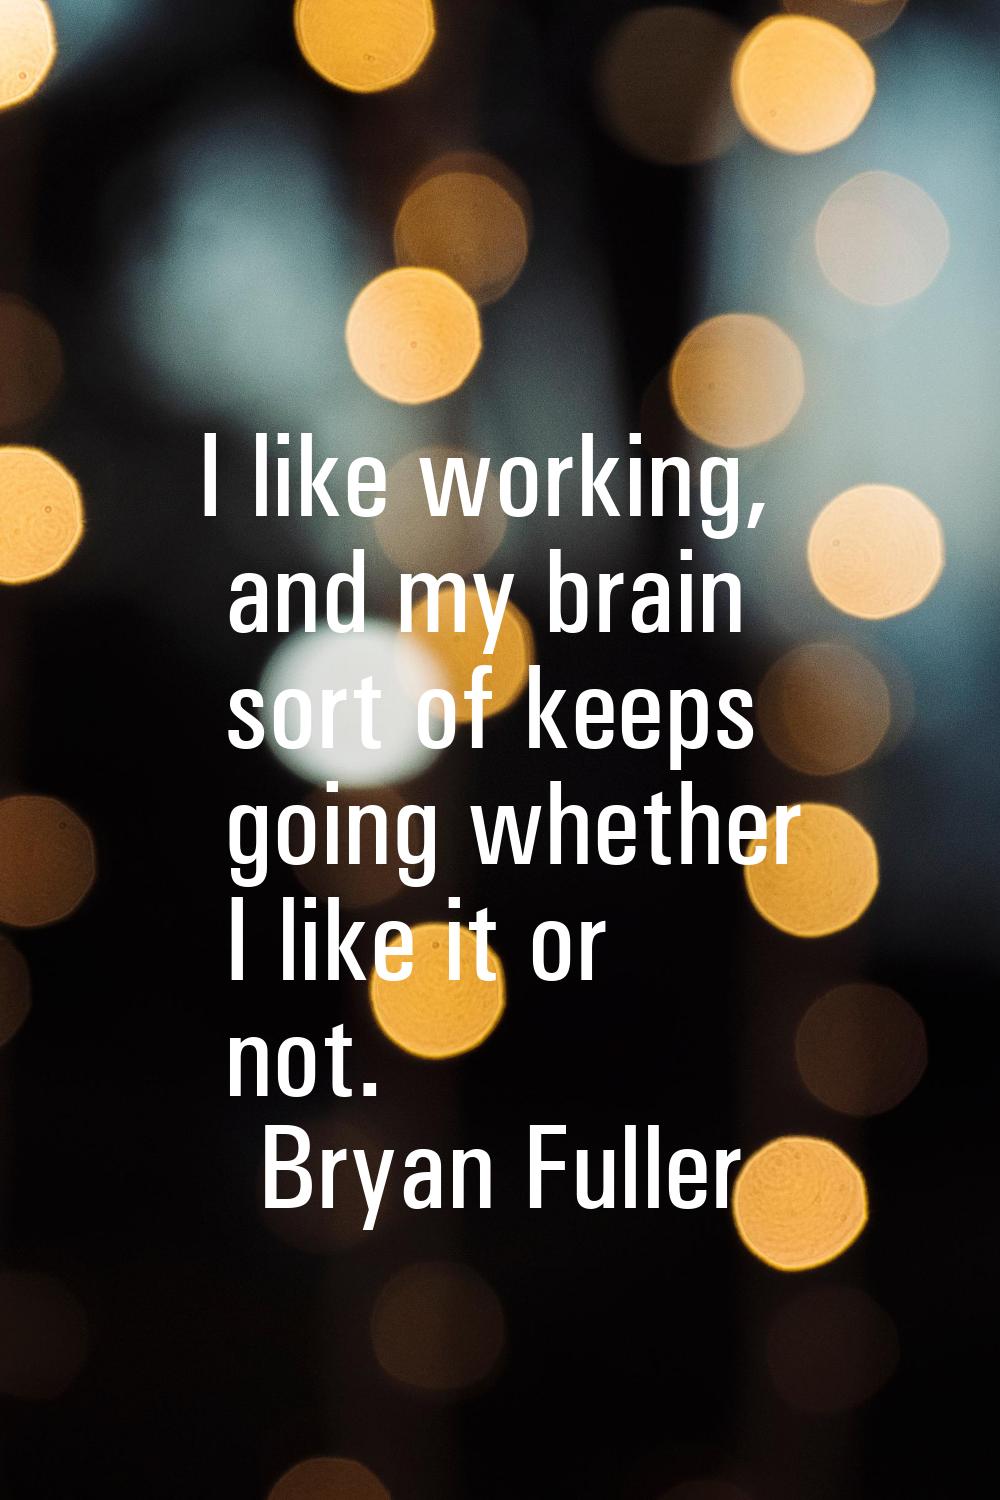 I like working, and my brain sort of keeps going whether I like it or not.